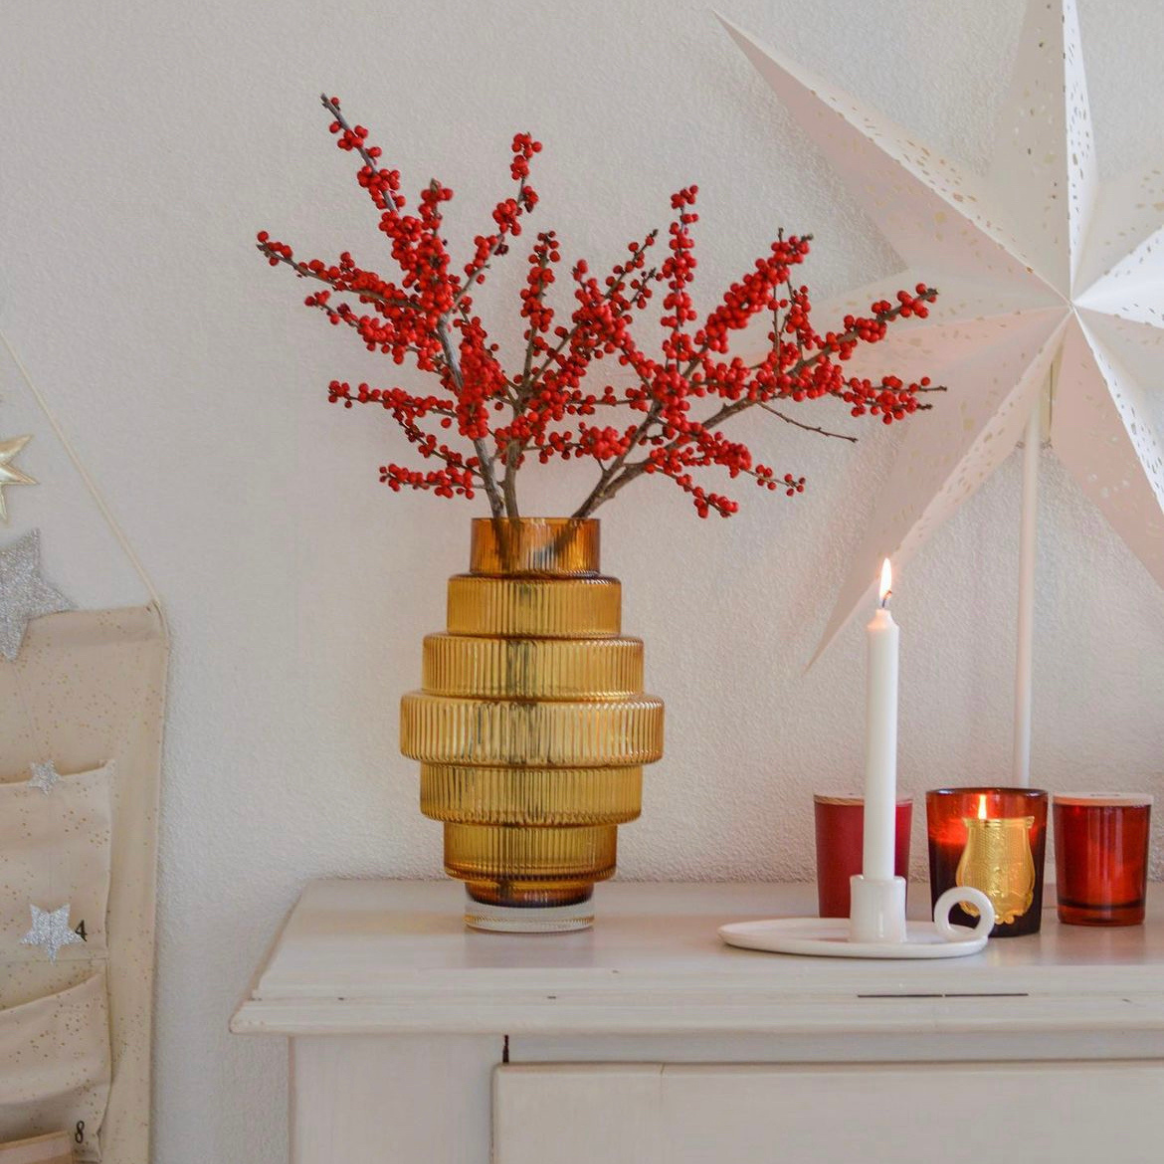 From Candles to Cable Knit: 4 Ways to Nail November Decor